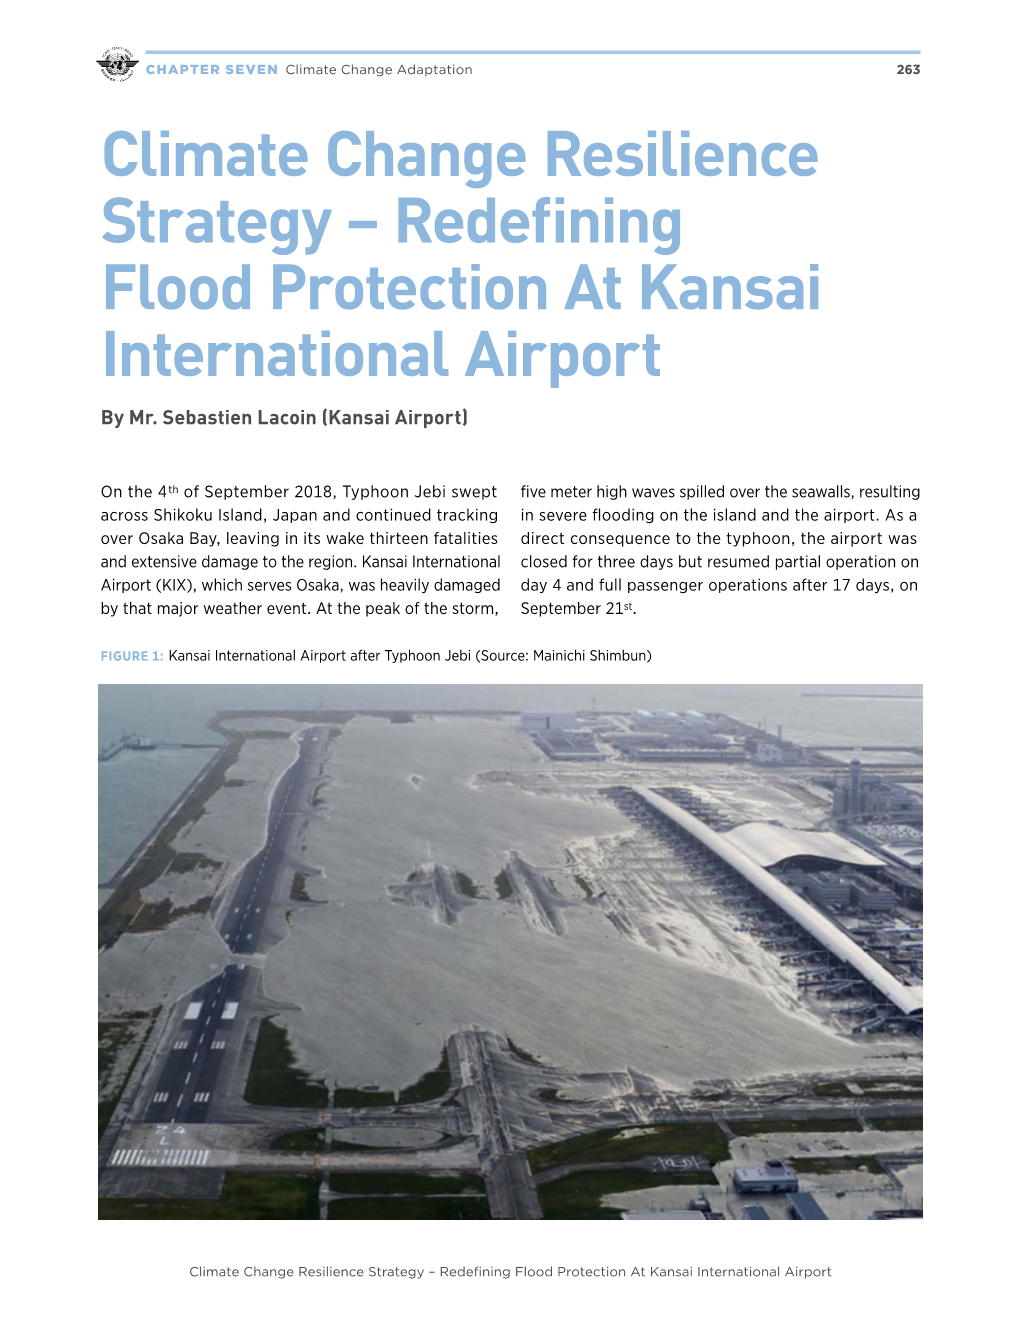 Redefining Flood Protection at Kansai International Airport by Mr